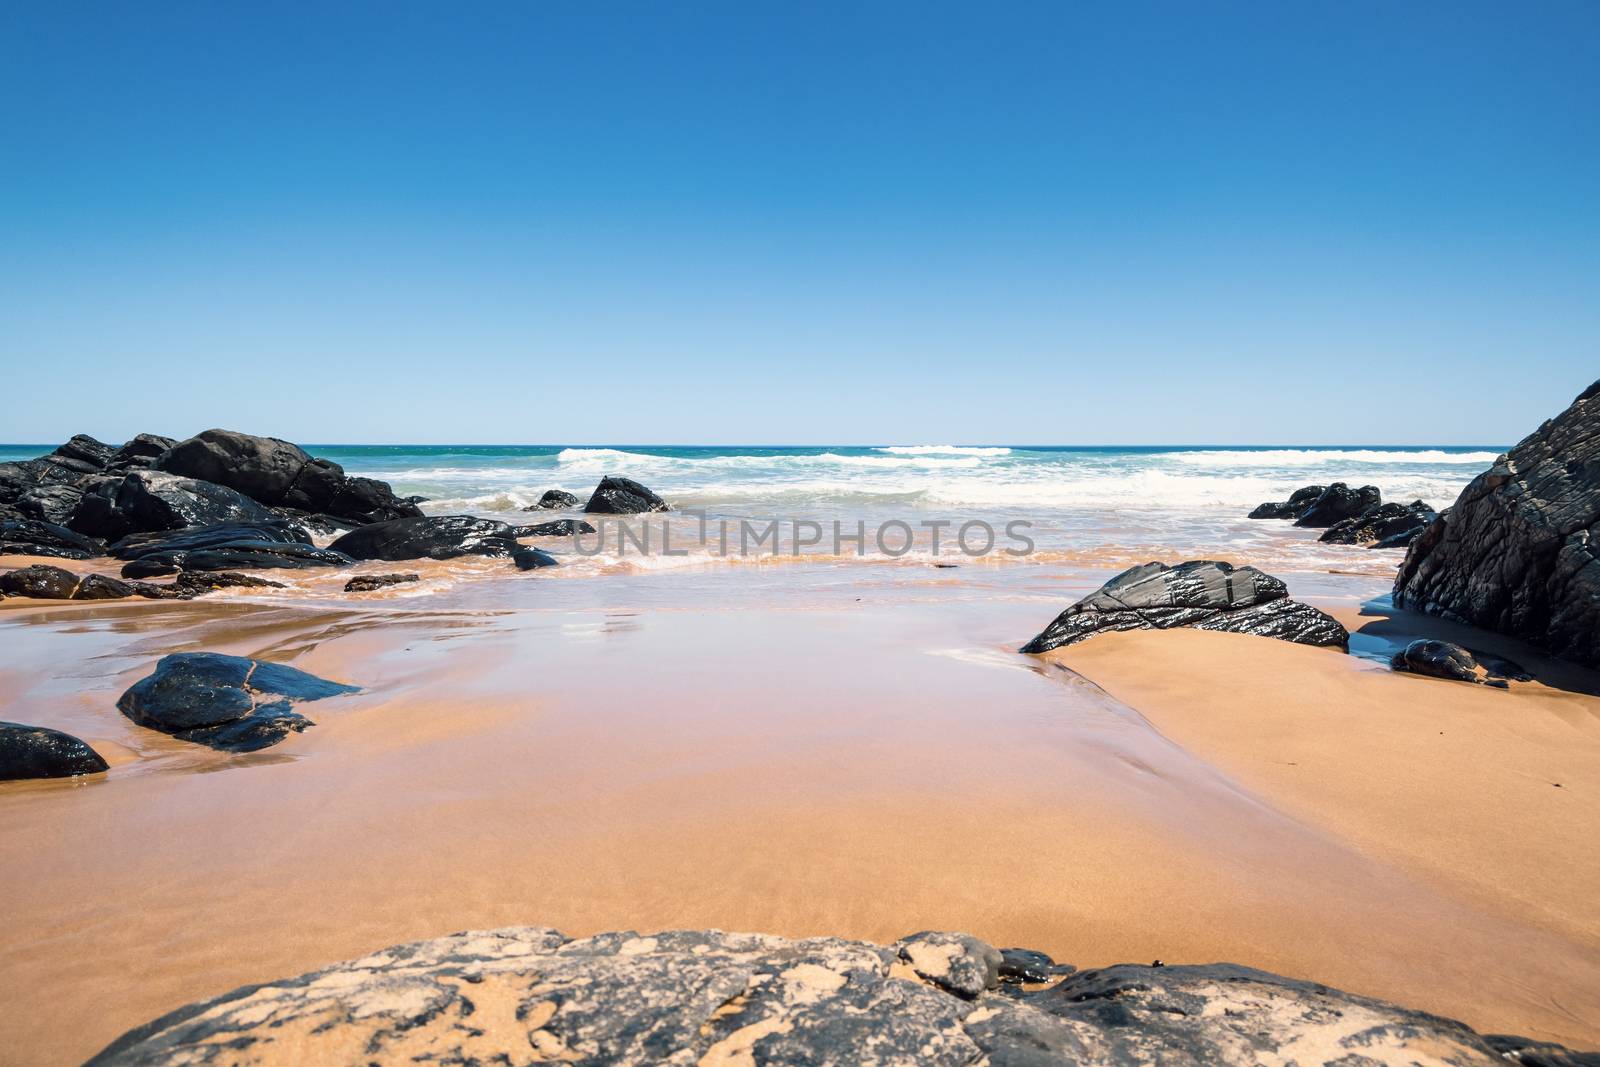 An image of a beach in south Australia near Victor Harbor